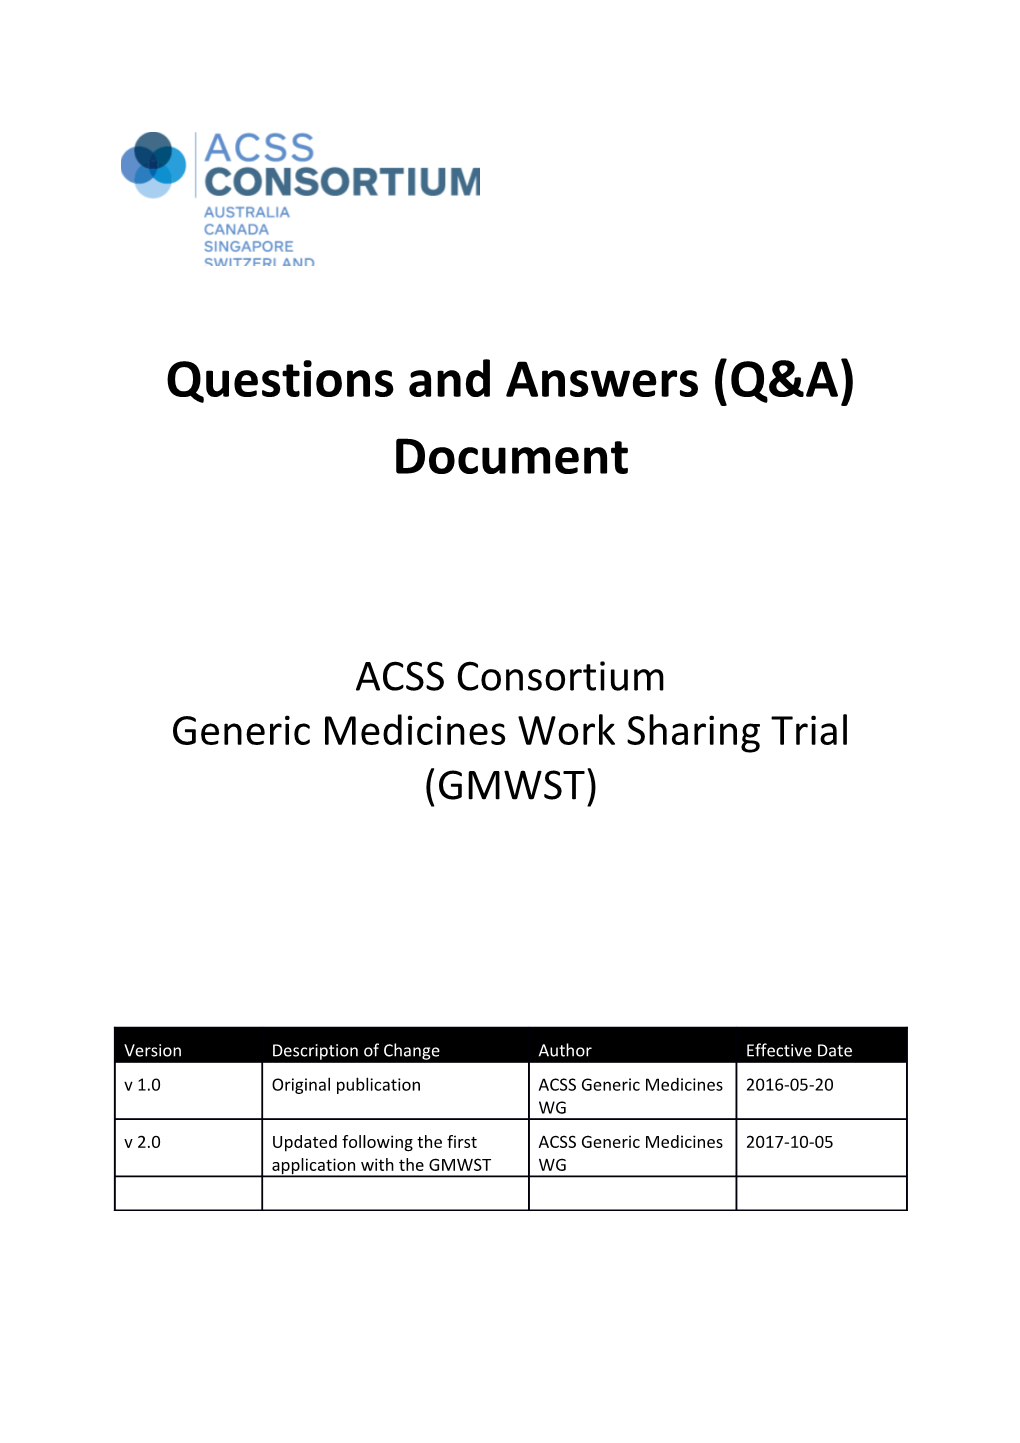 Questions and Answers (Q&A) Document